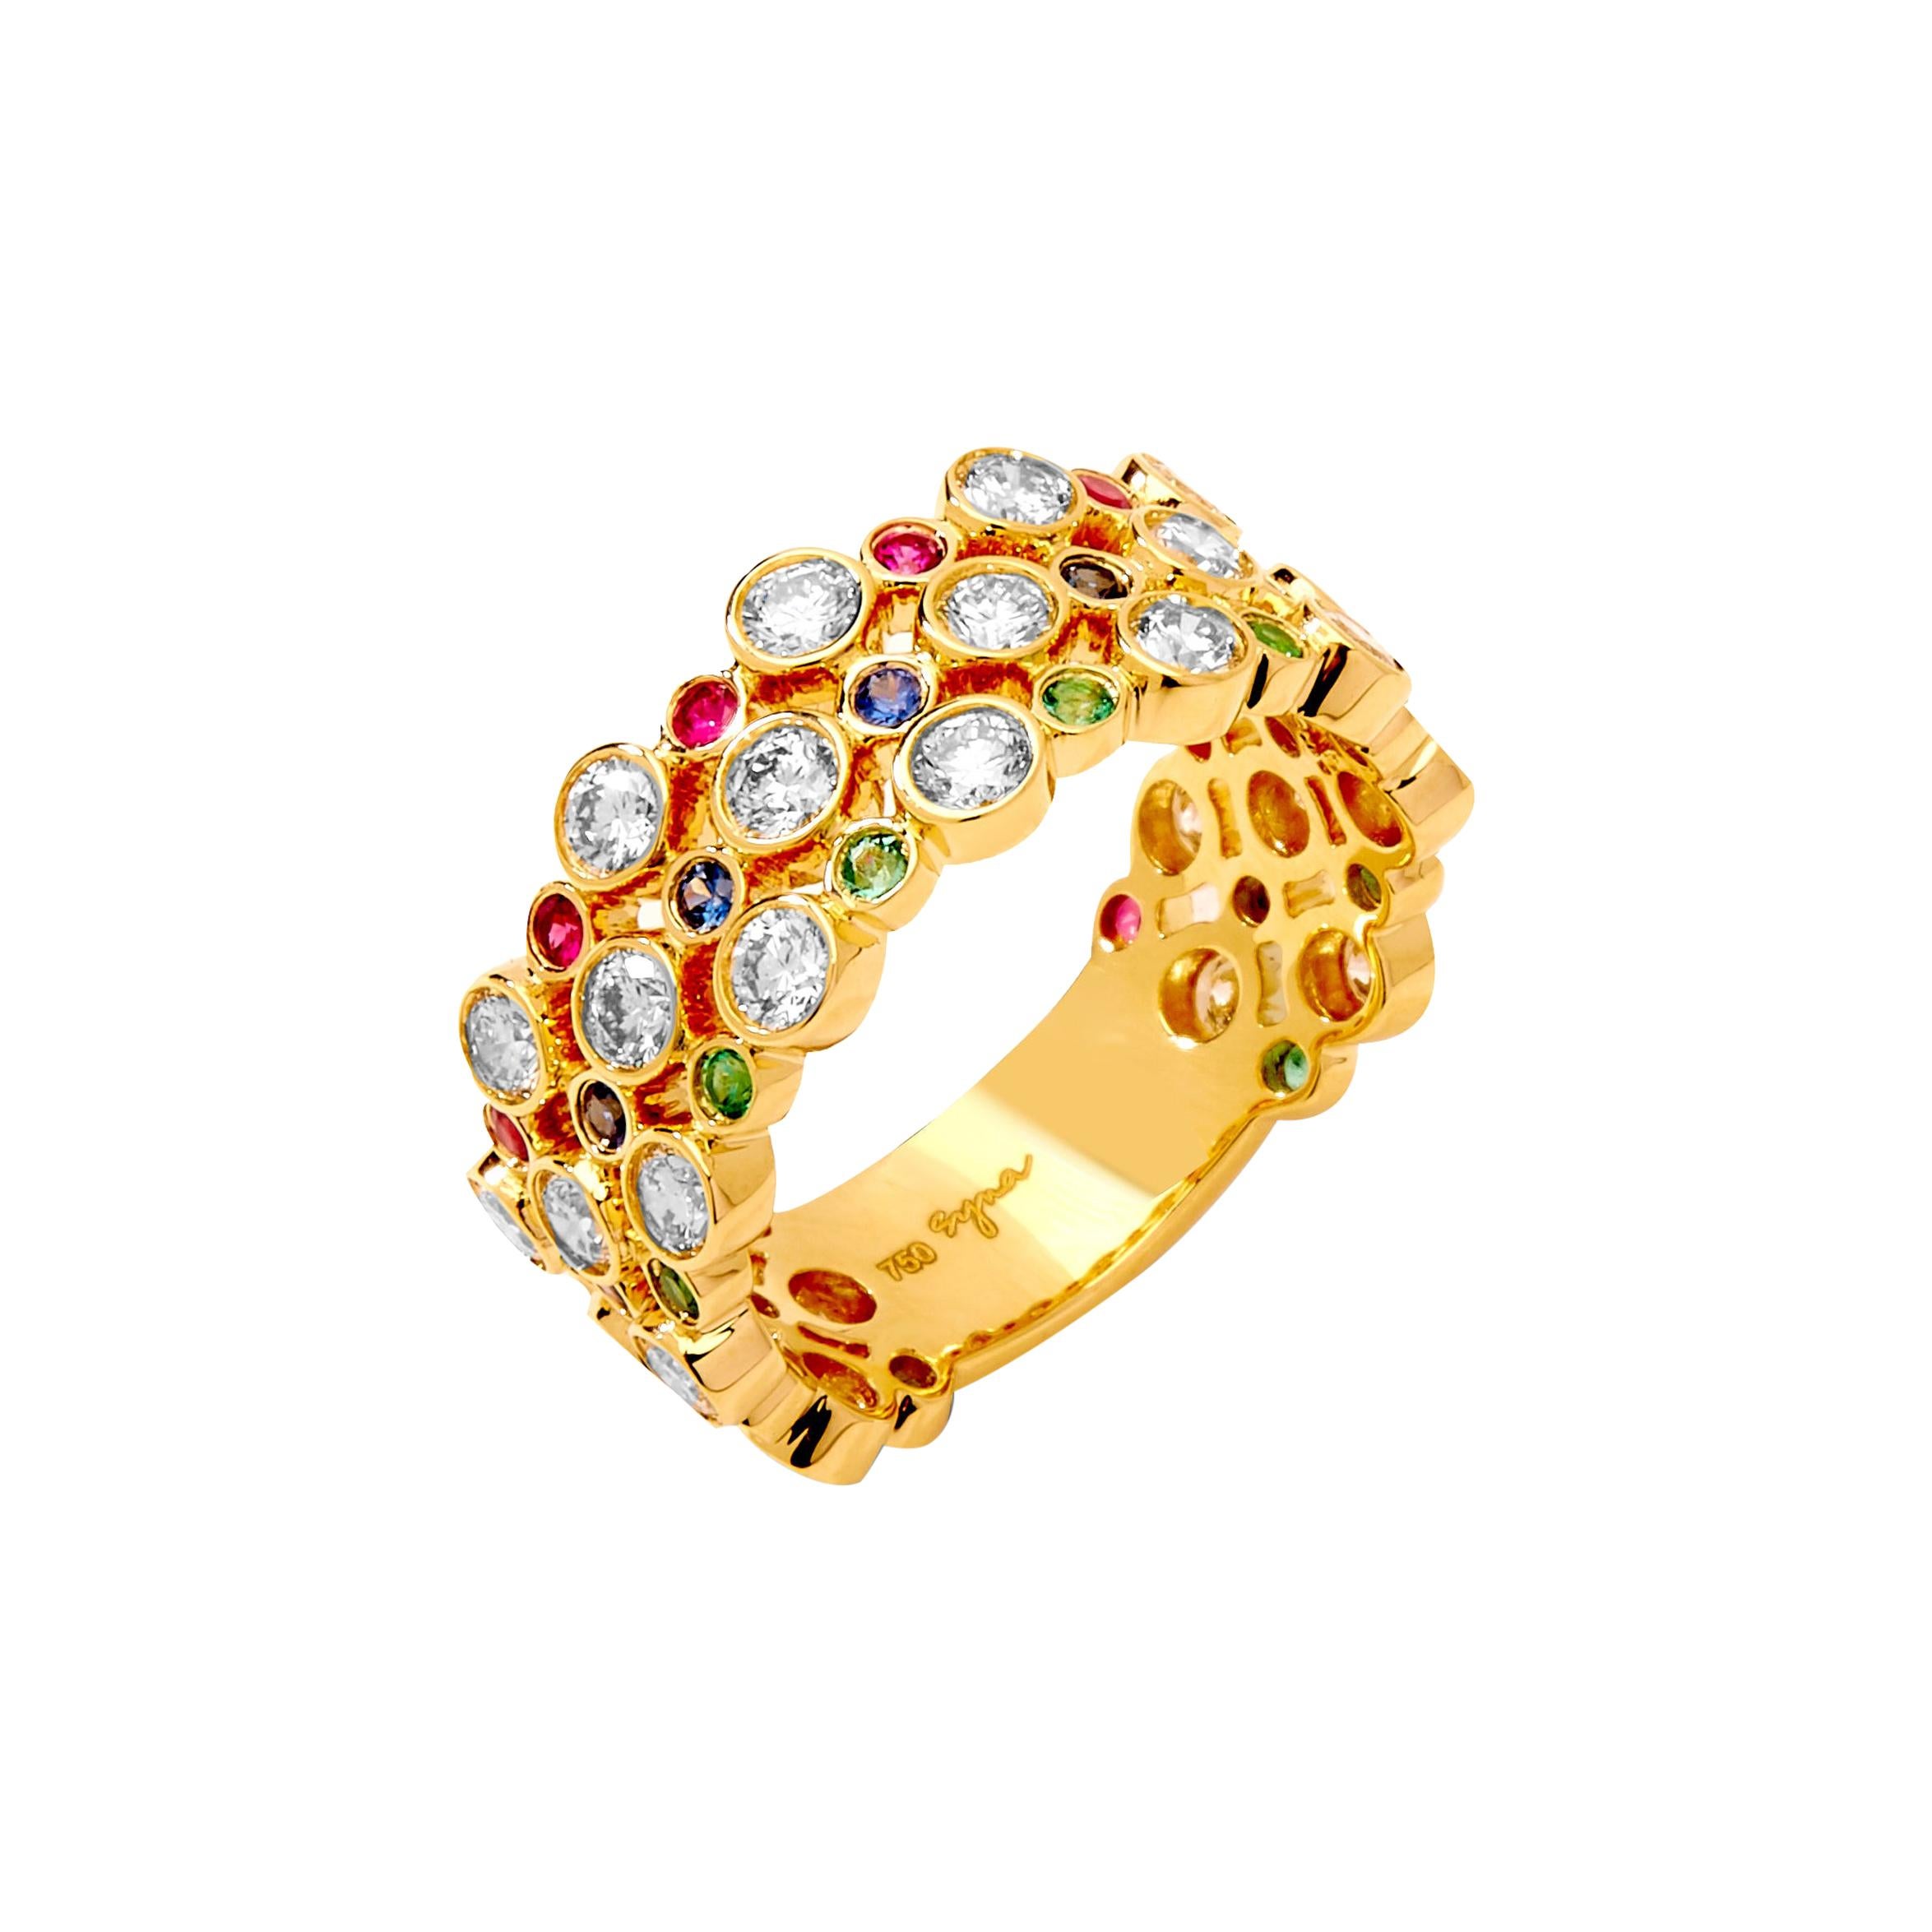 Syna Yellow Gold Band with Emeralds, Rubies, Sapphires and Diamonds